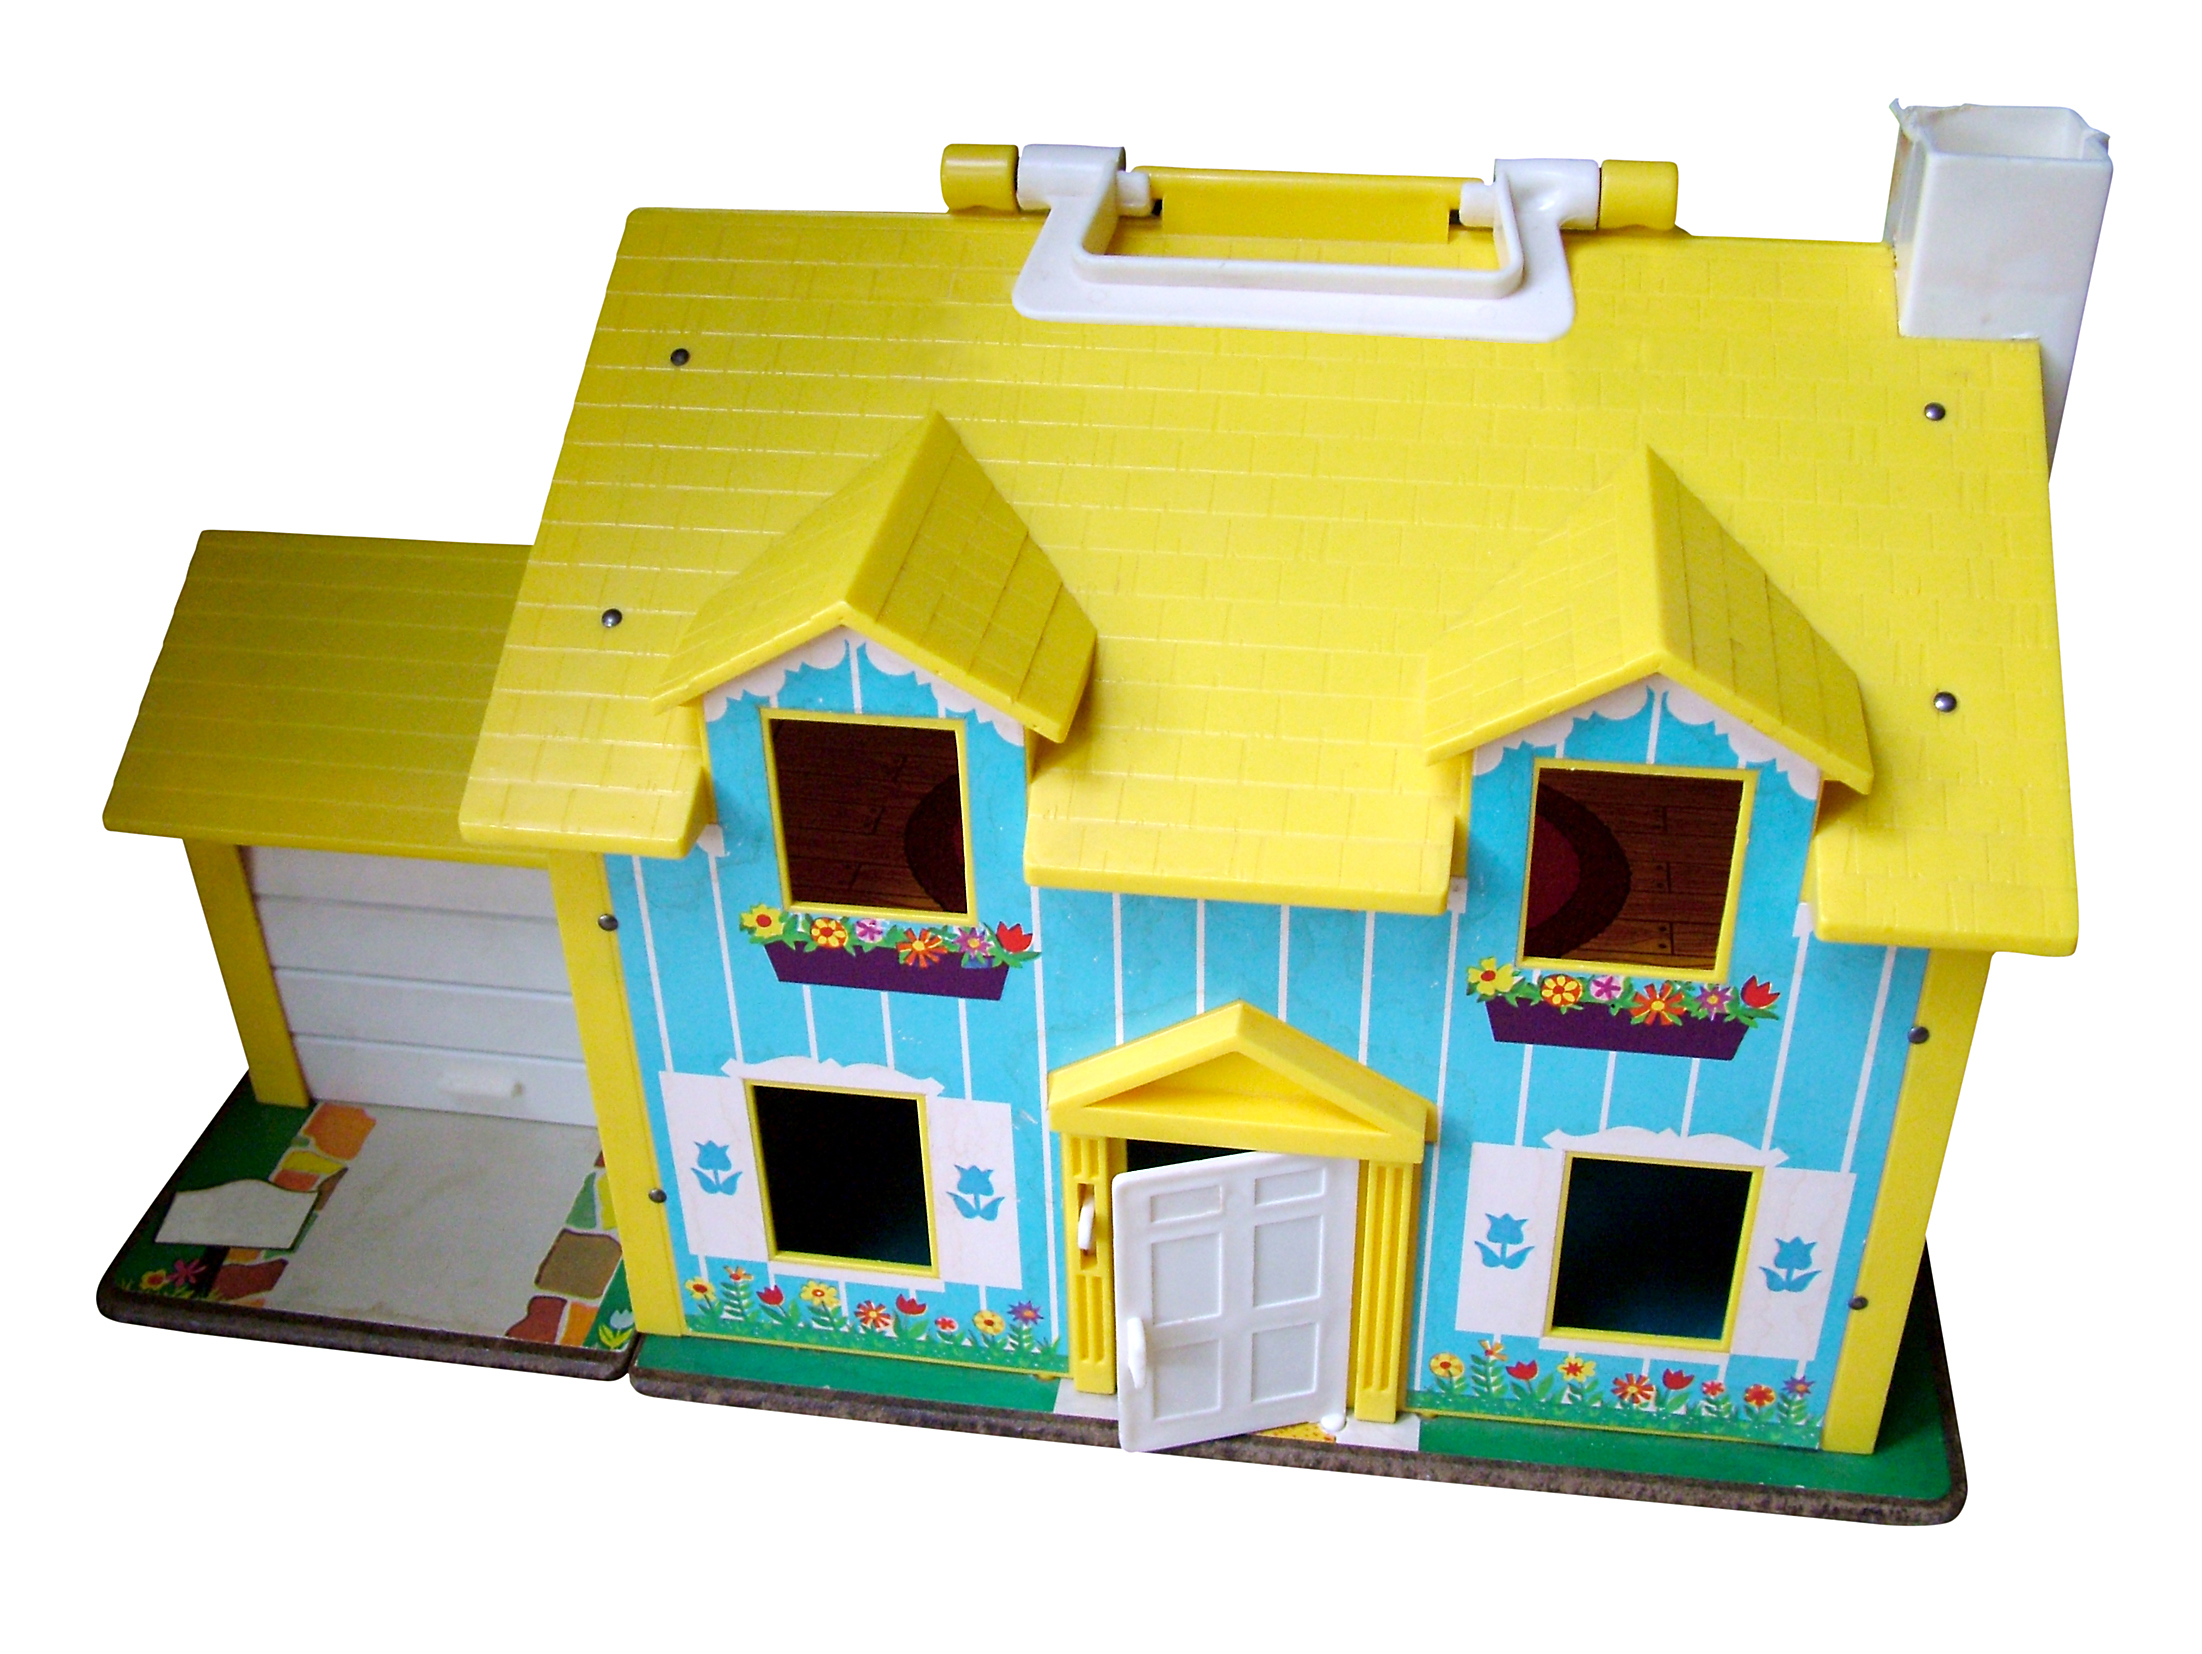 Toy House on white background